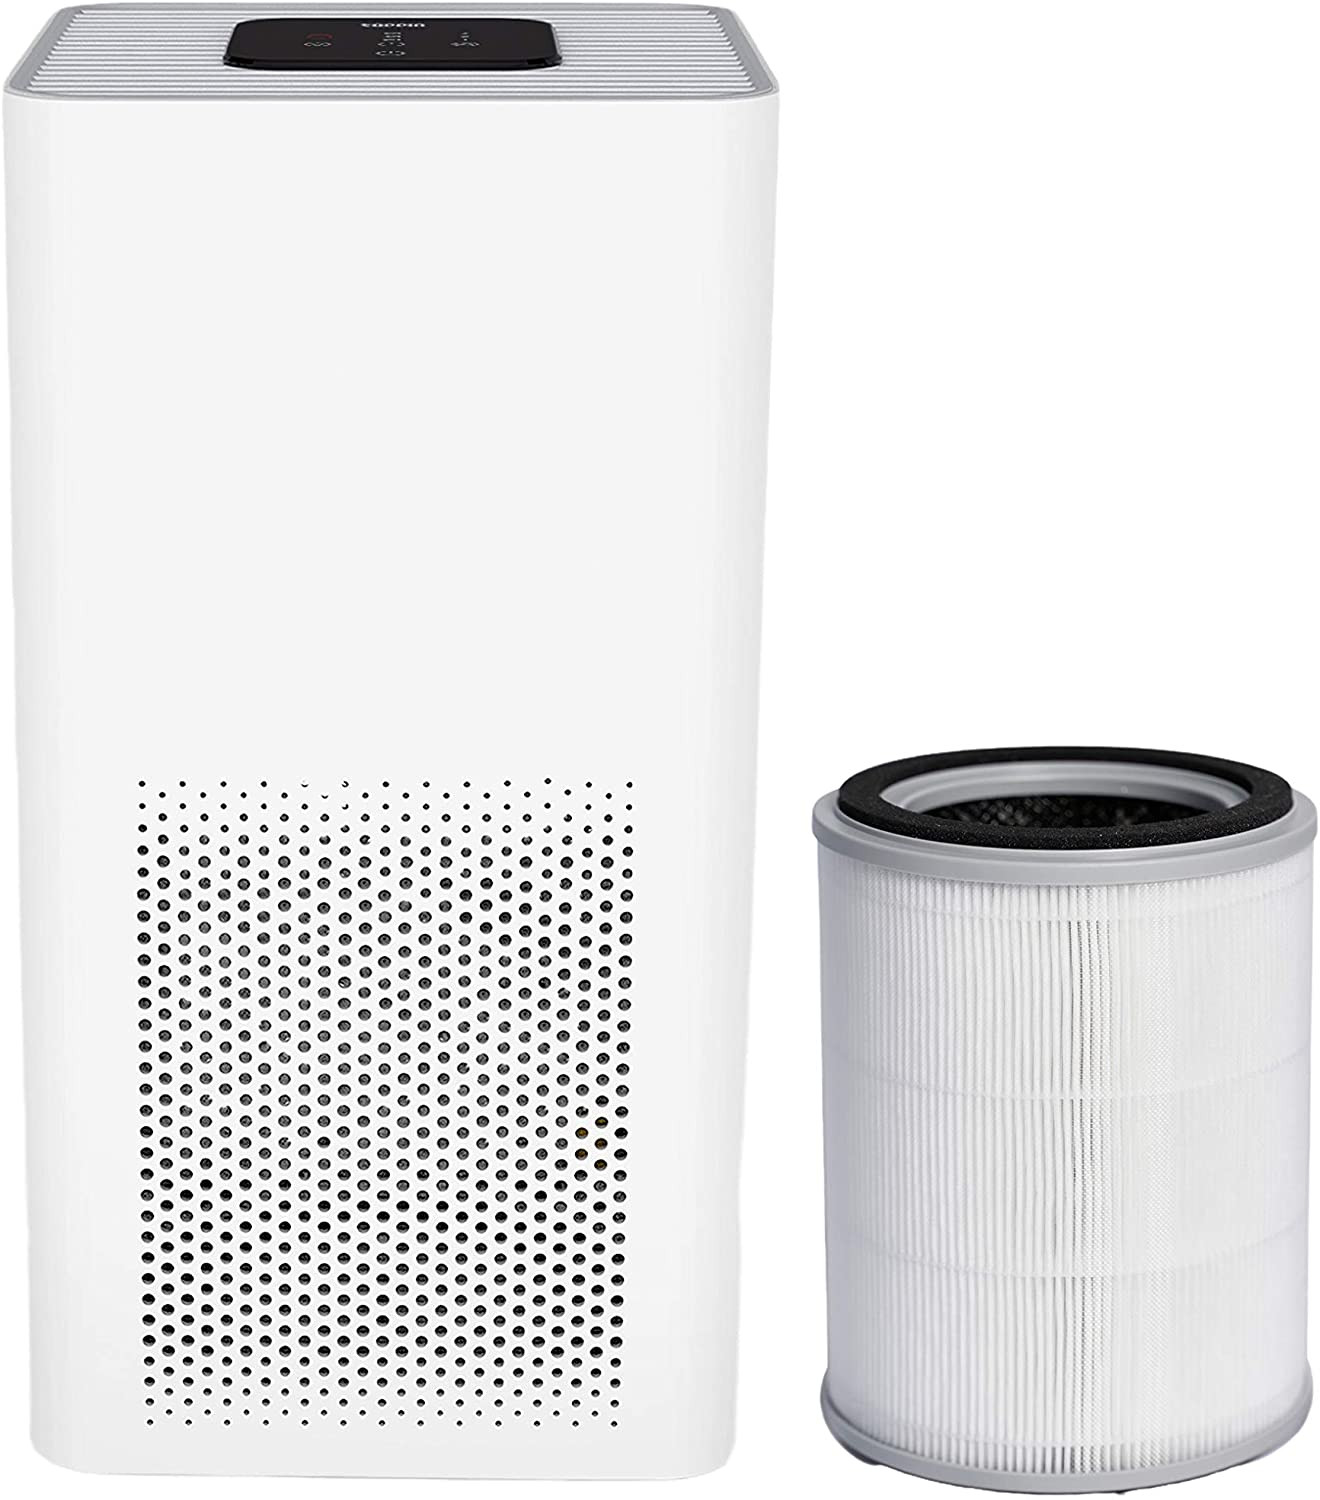 Toppin air purifier replacement filter